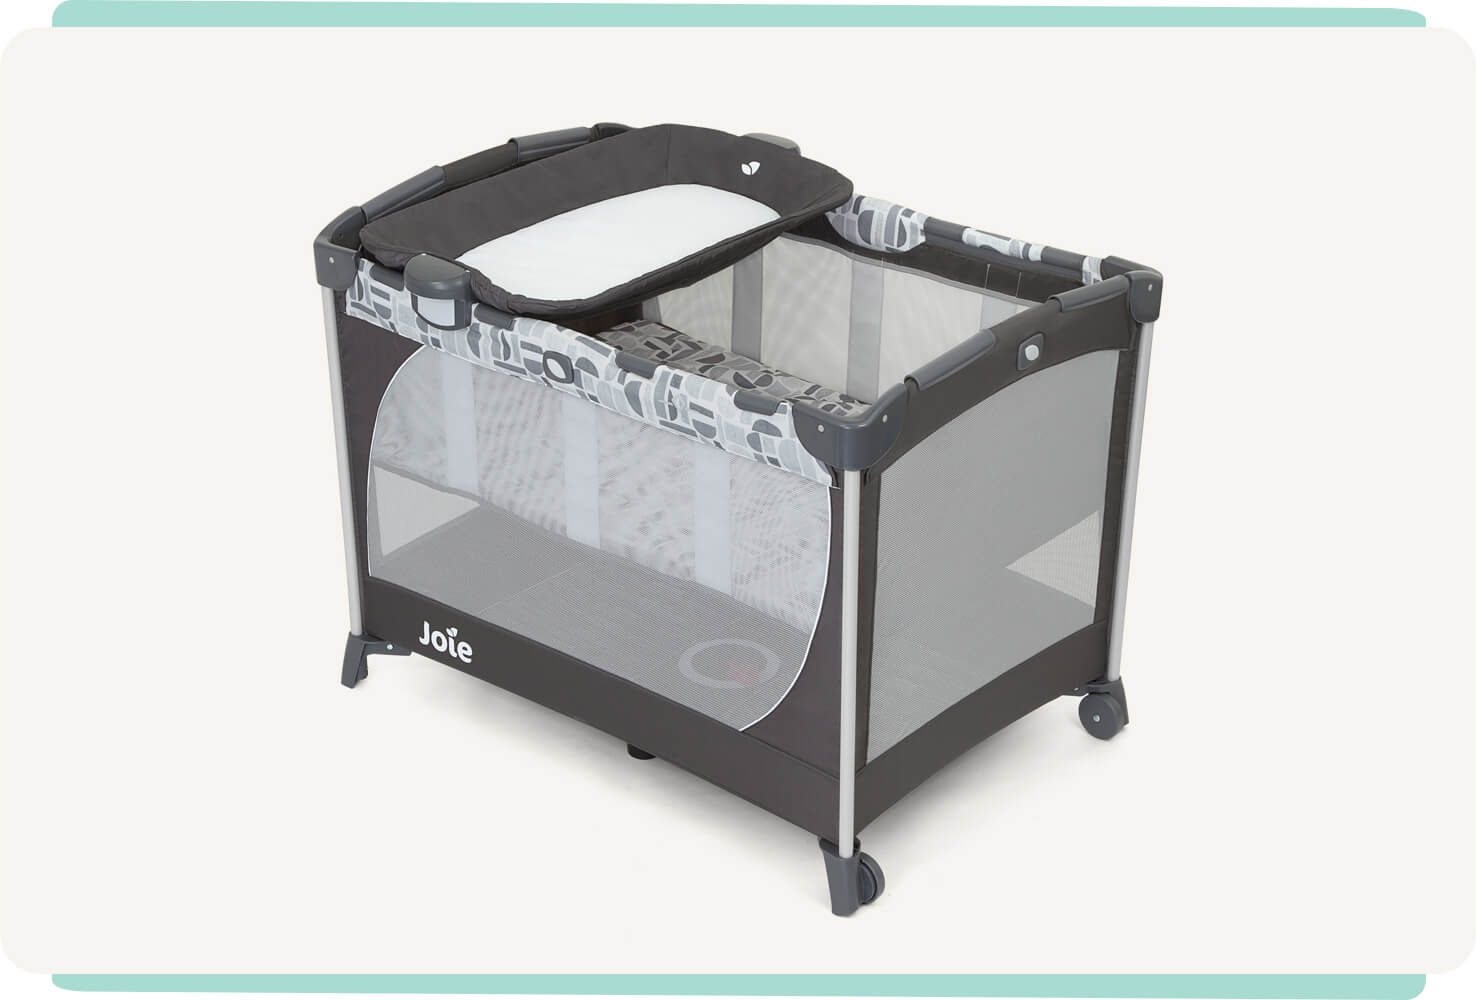 The Joie travel cot commuter change in grey and blue pattern with a bassinet and changer at a right angle.